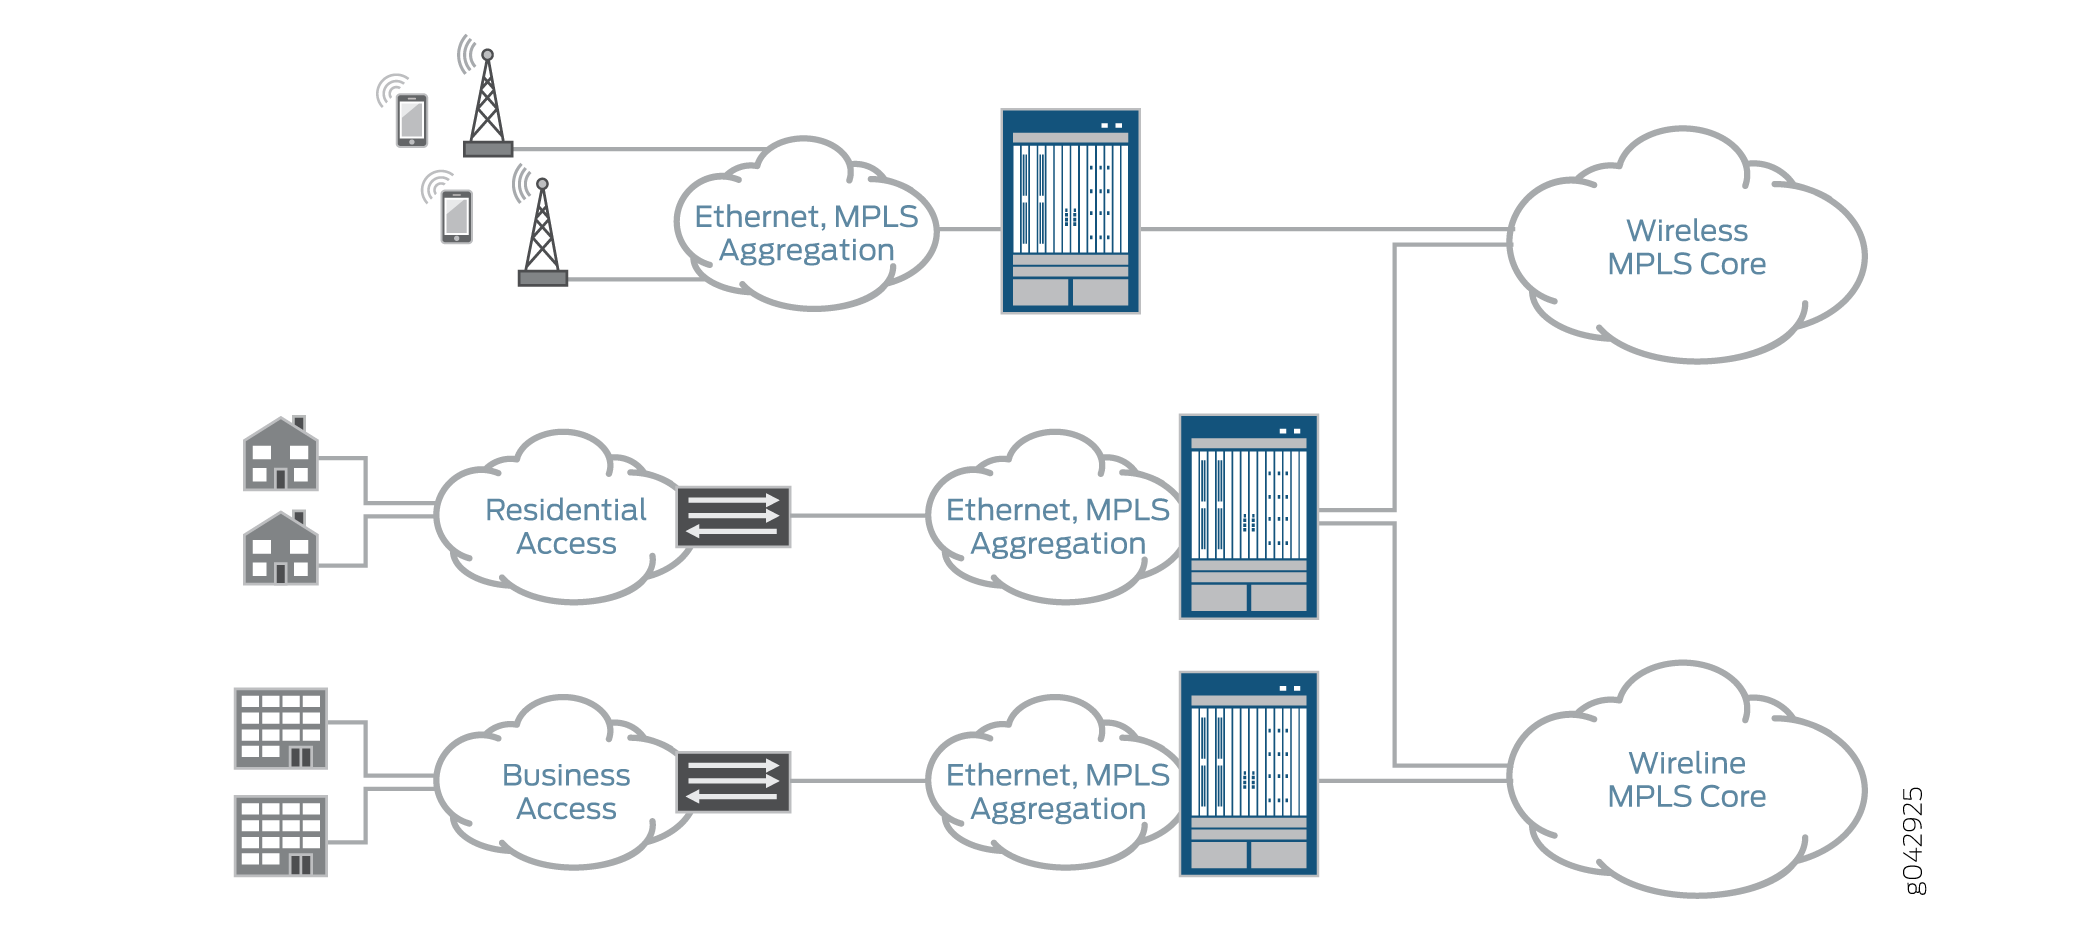 Traditional Network Architecture Without Convergence